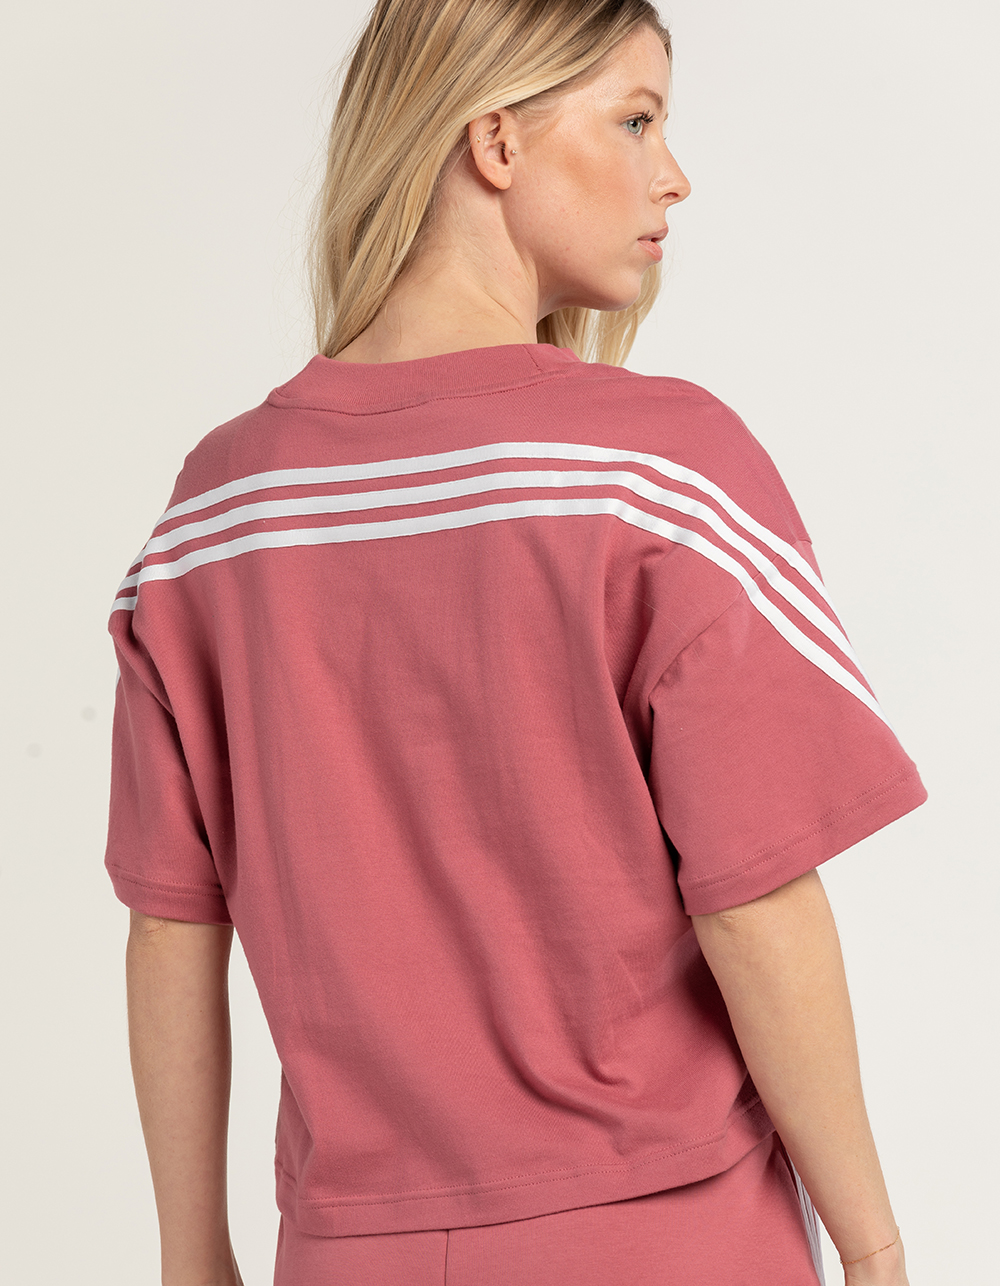 Gewend motto cement ADIDAS Future Icons 3-Stripes Womens Crop Tee - STRAWBERRY | Tillys